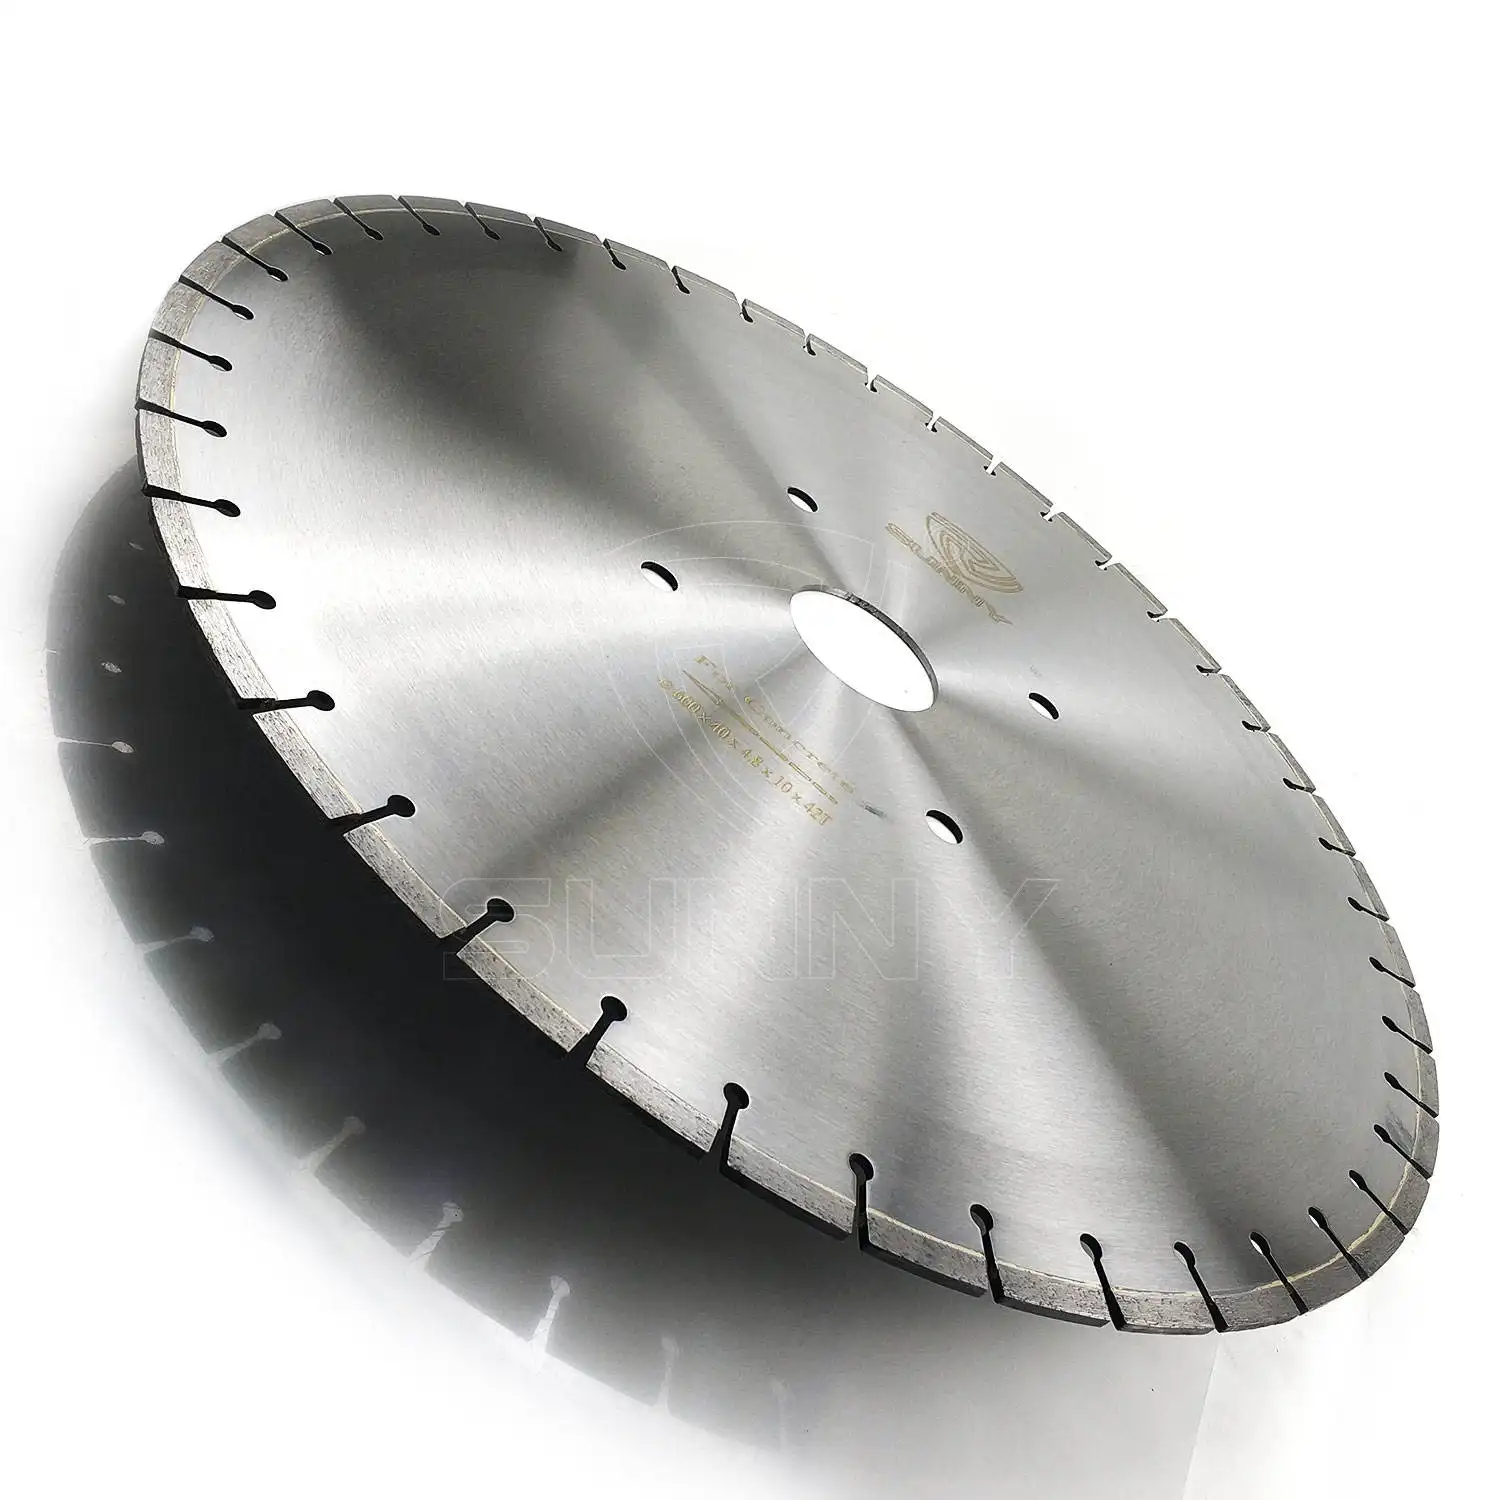 Factory wholesale 800mm laser welded Arix segment diamond disc blade wall saw cutting blade for reinforced concrete cutting